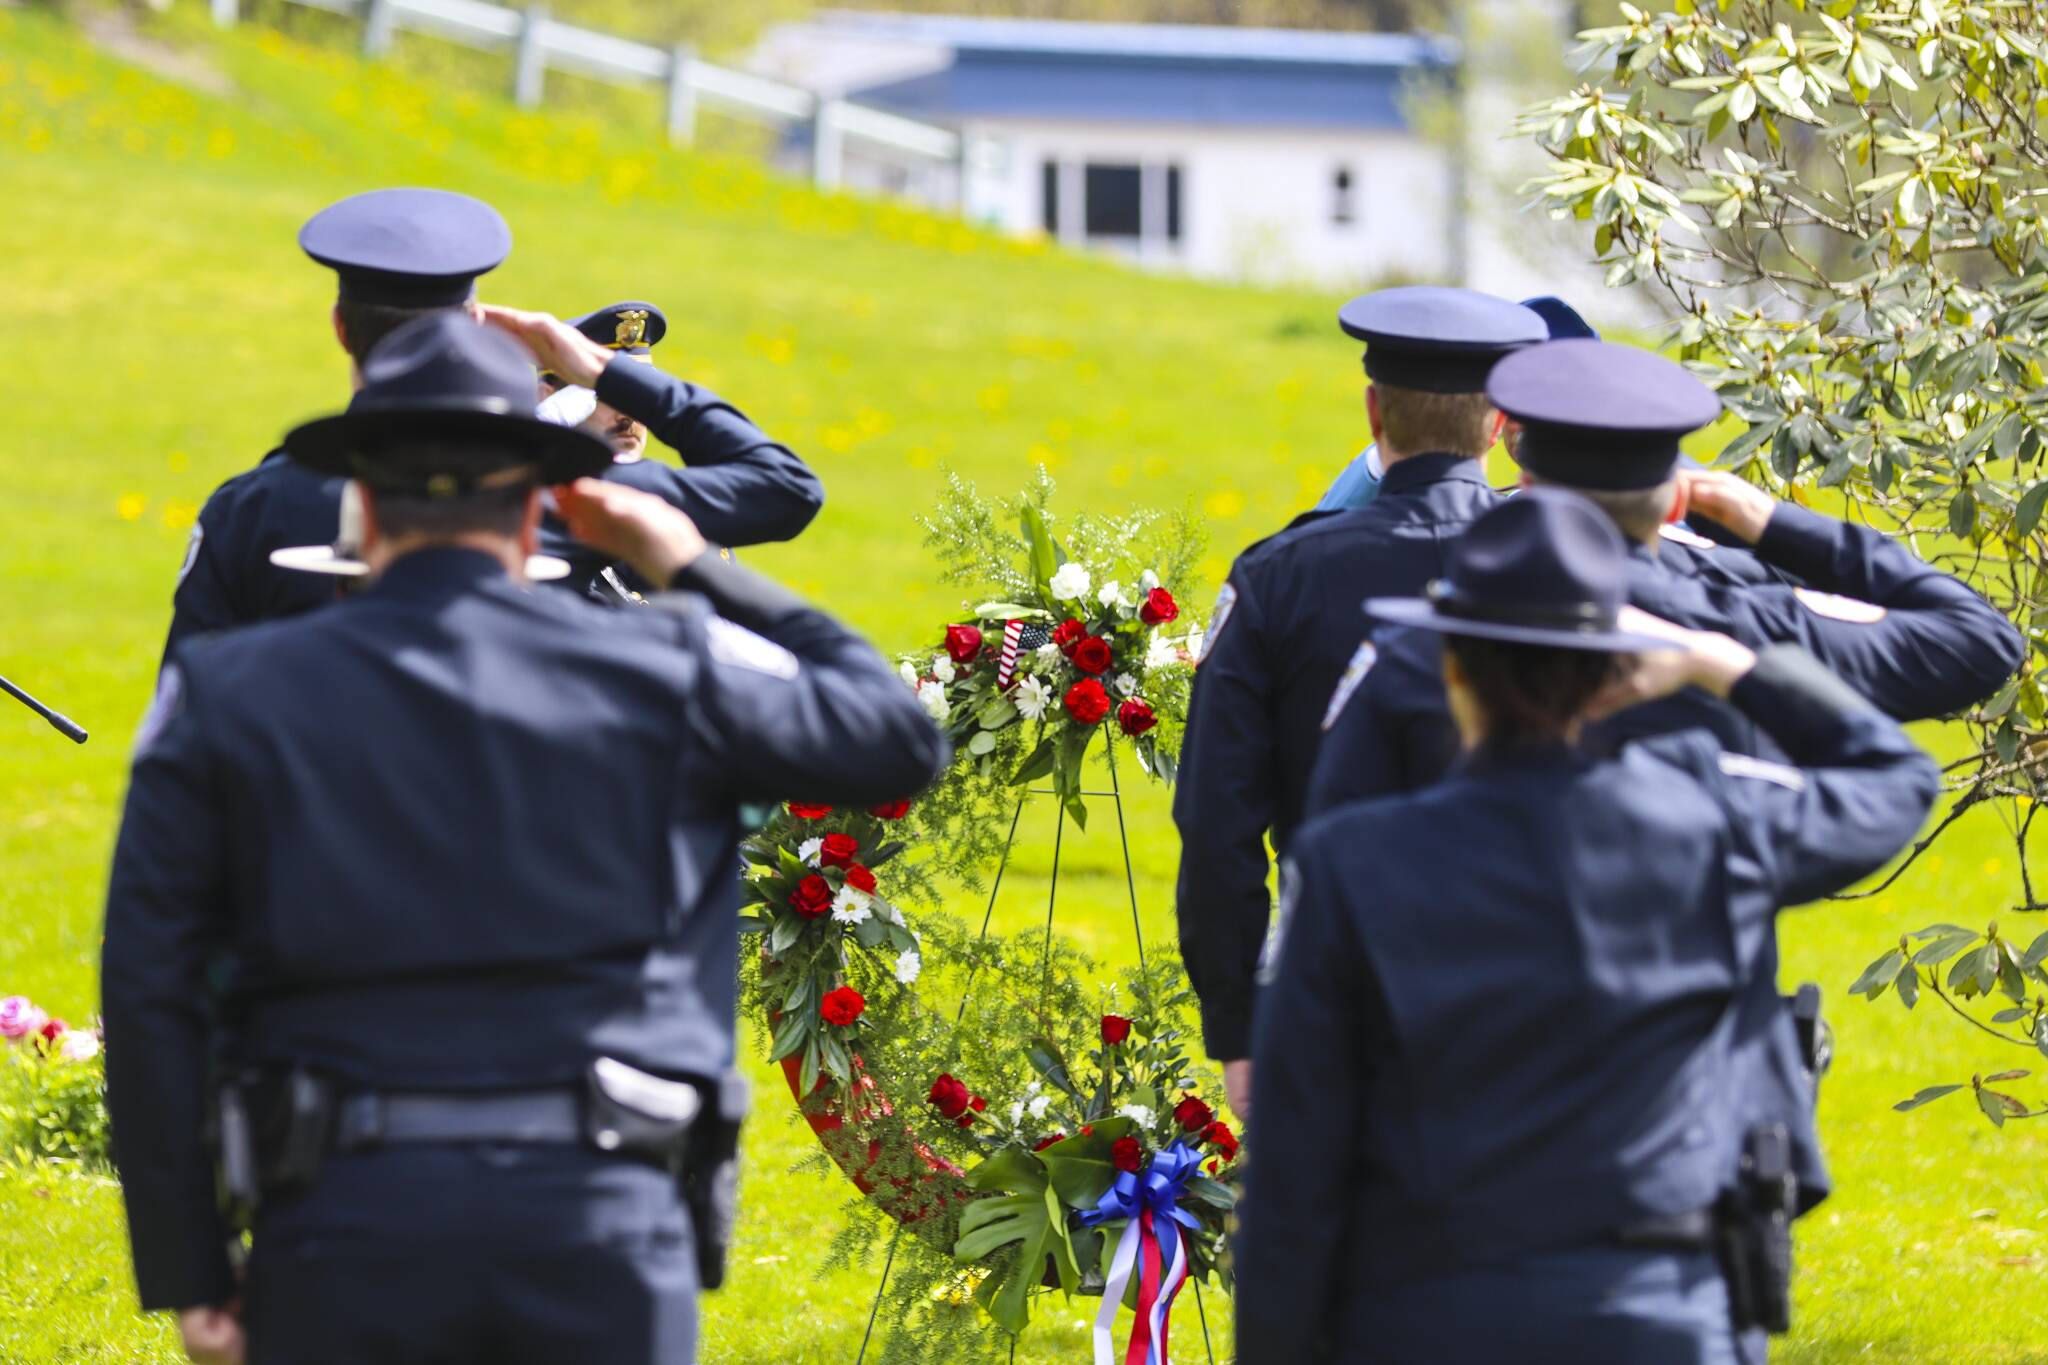 Michael S. Lockett / Juneau Empire
Law enforcement personnel salute as officers lay a ceremonial wreath on the grave of a dead officer at Evergreen Cemetery for Peace Officers Memorial Day on May 13, 2022.